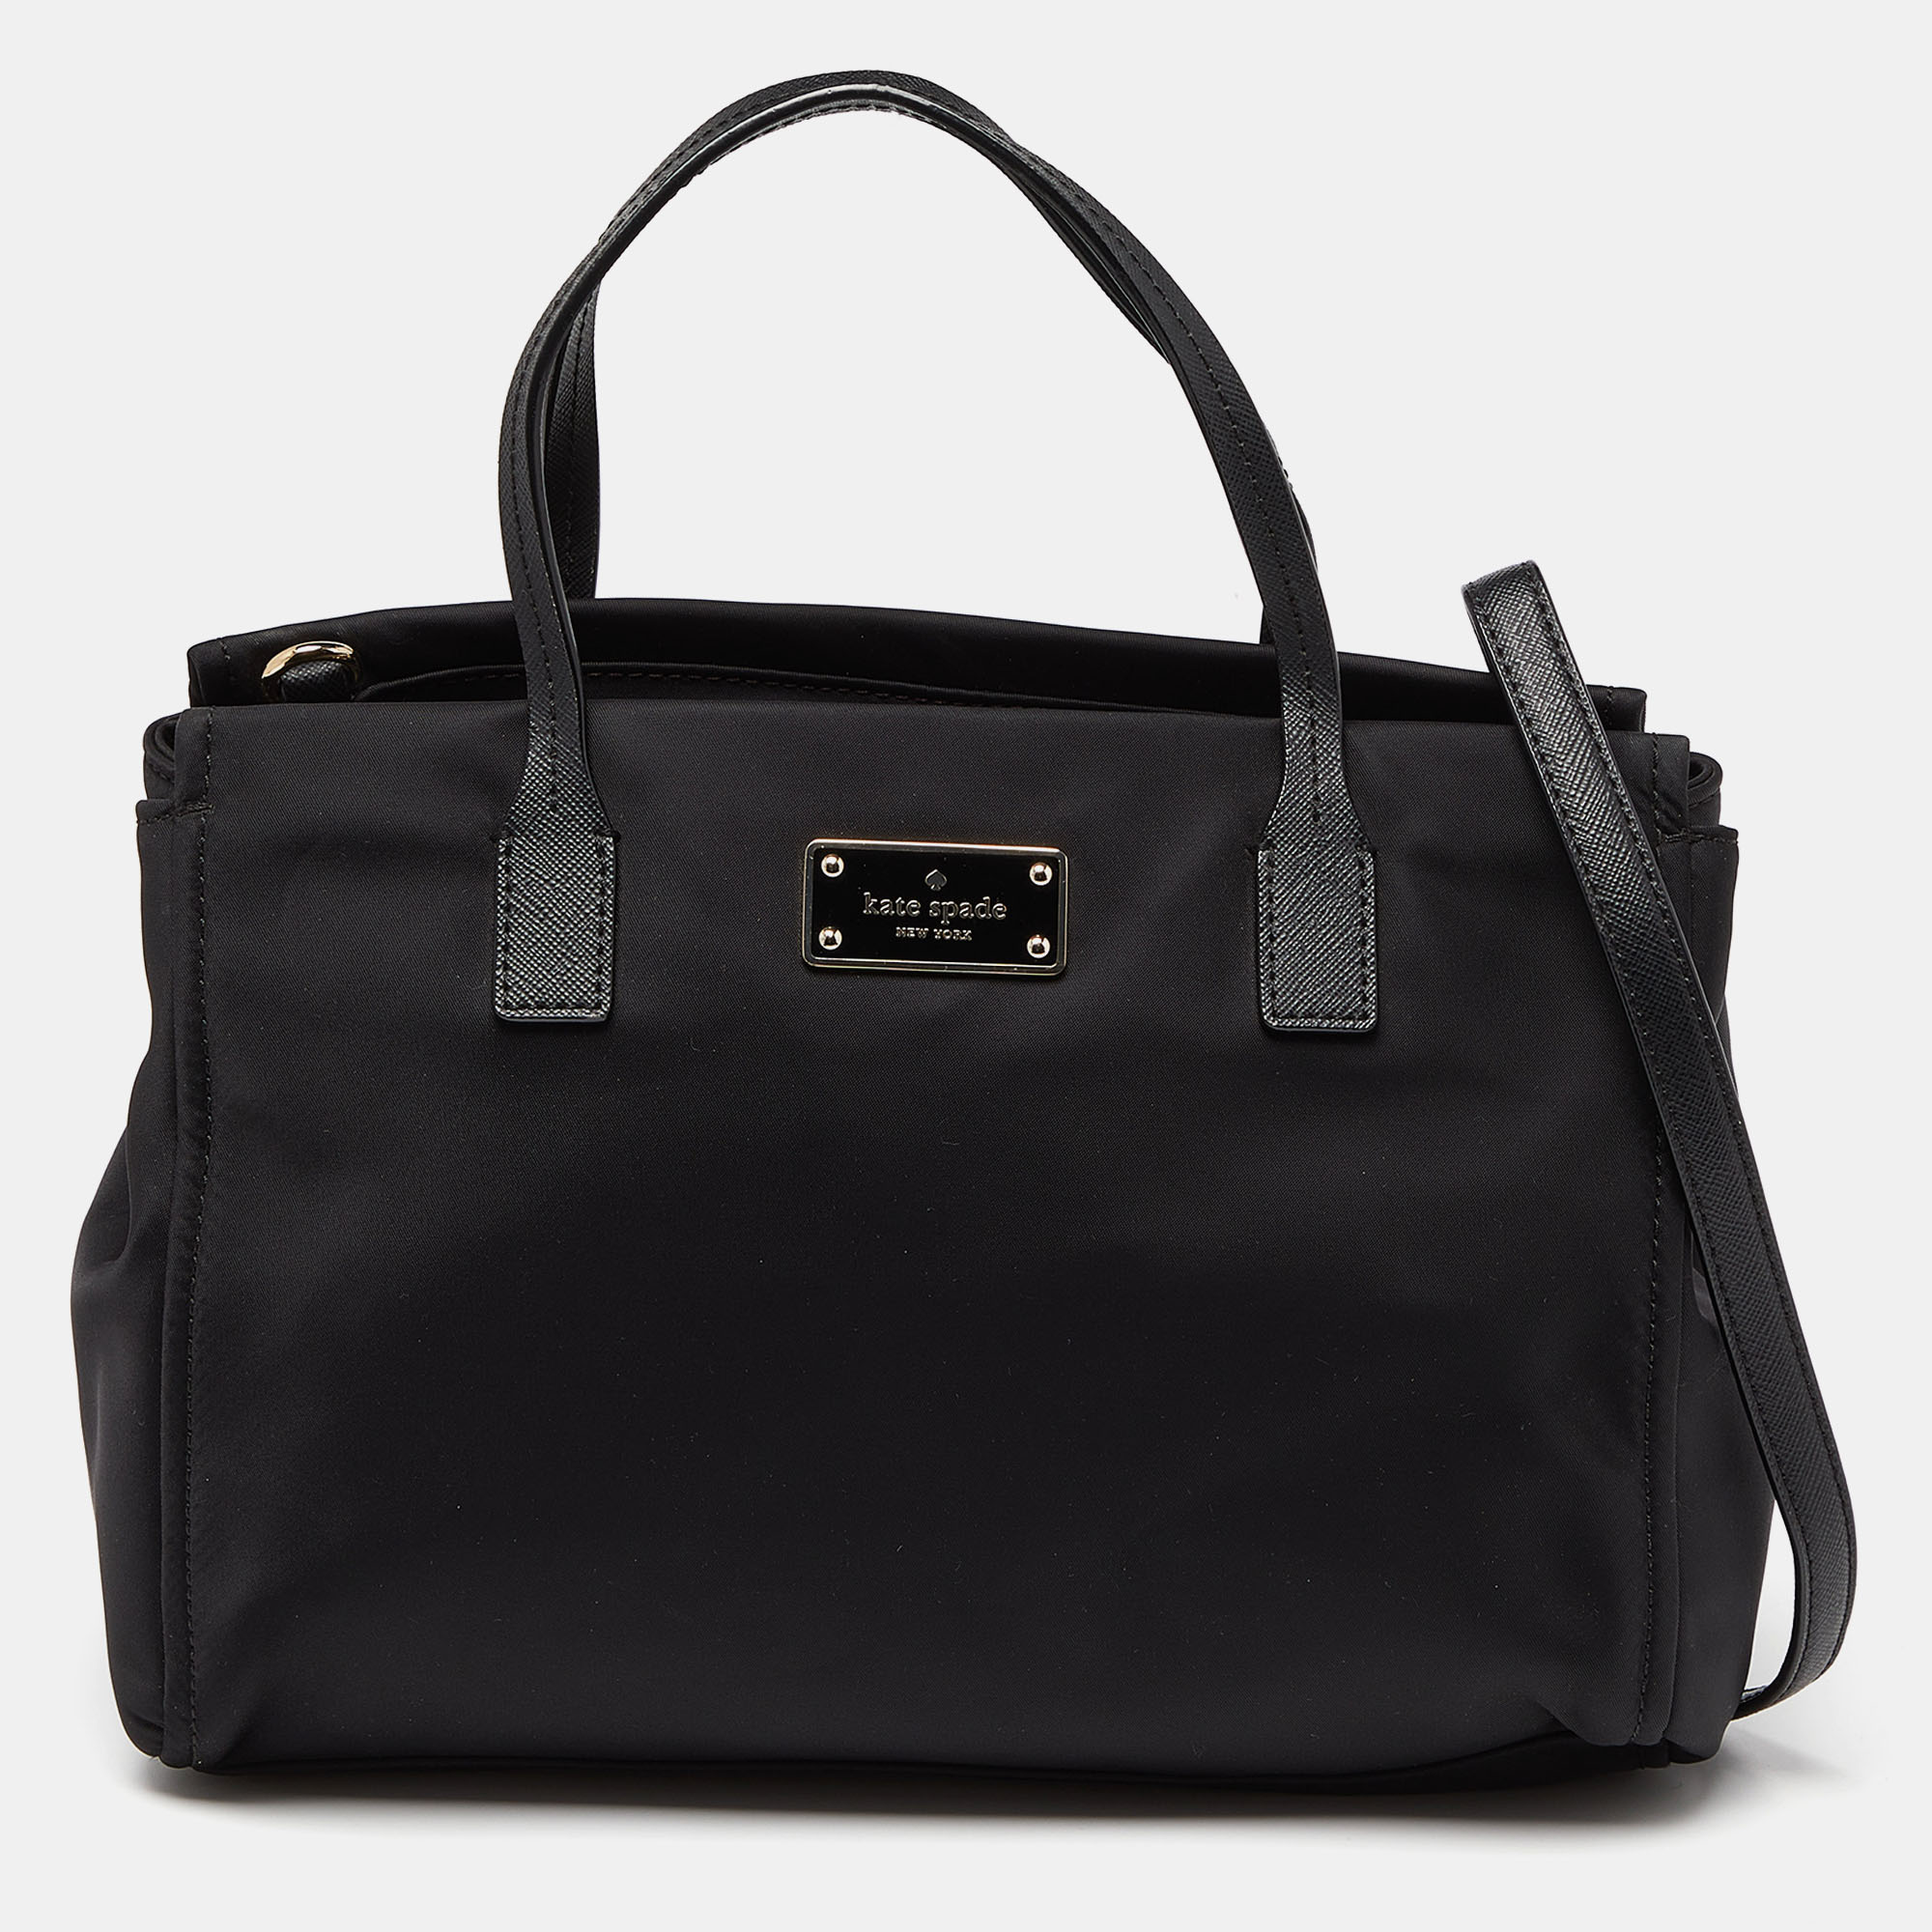 Pre-owned Kate Spade Black Nylon And Leather Blake Avenue Tote